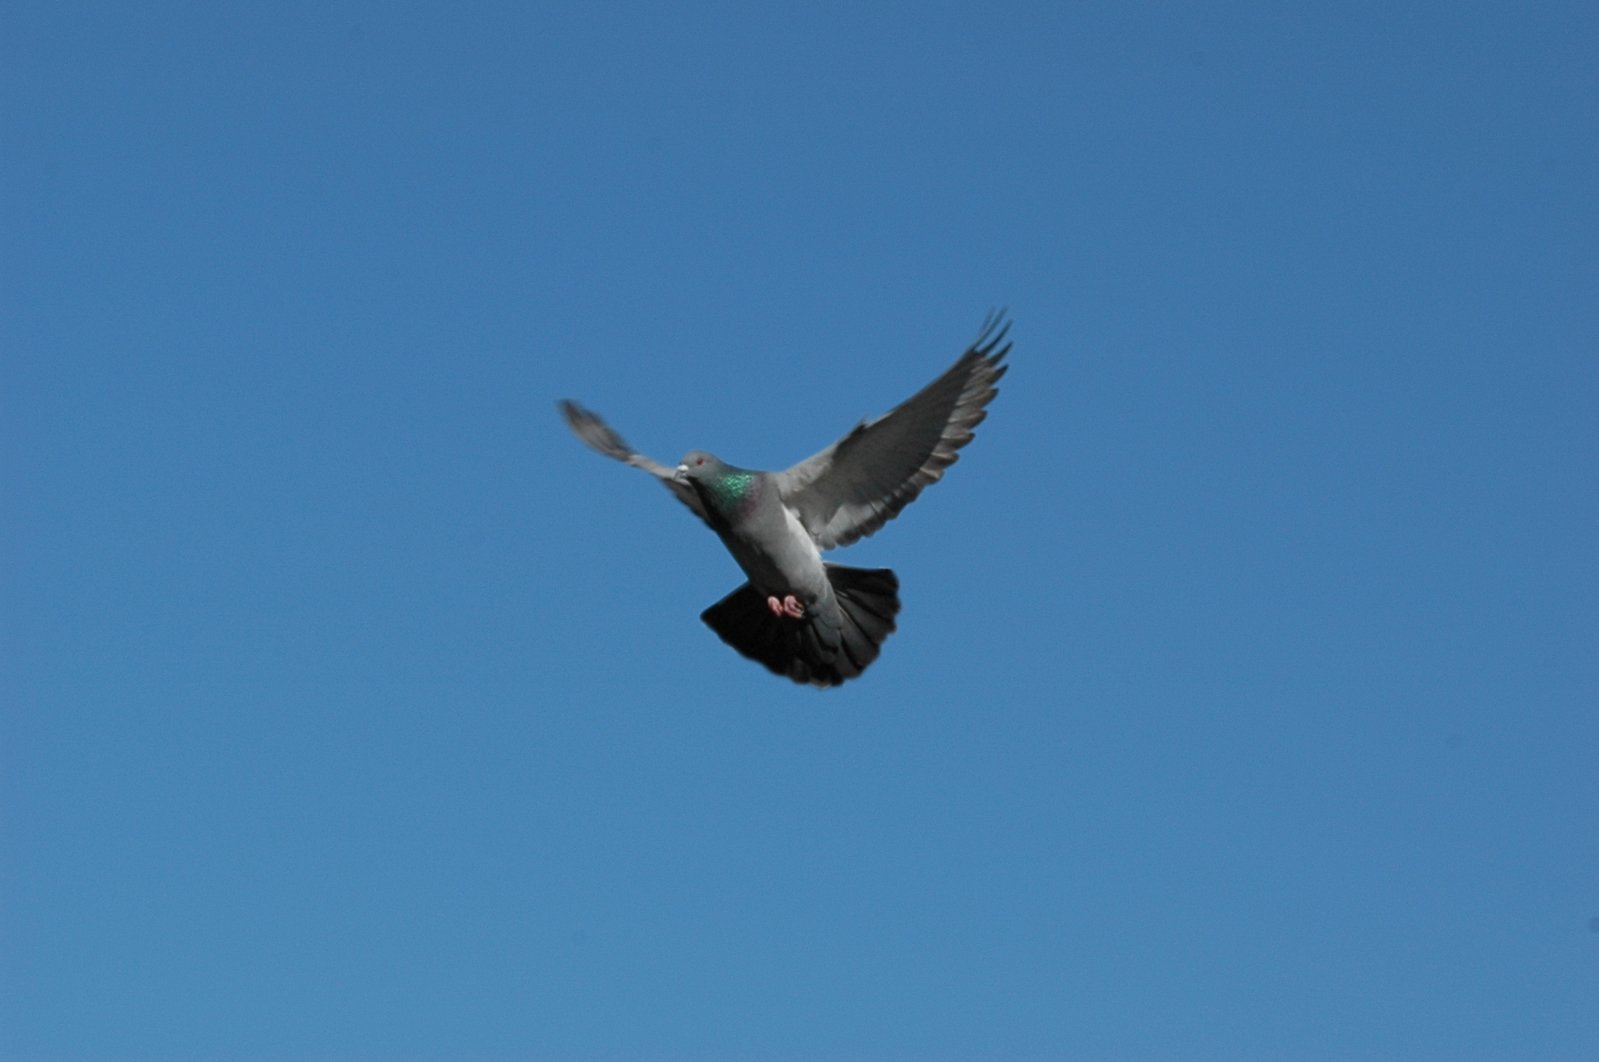 the black bird is flying against the blue sky